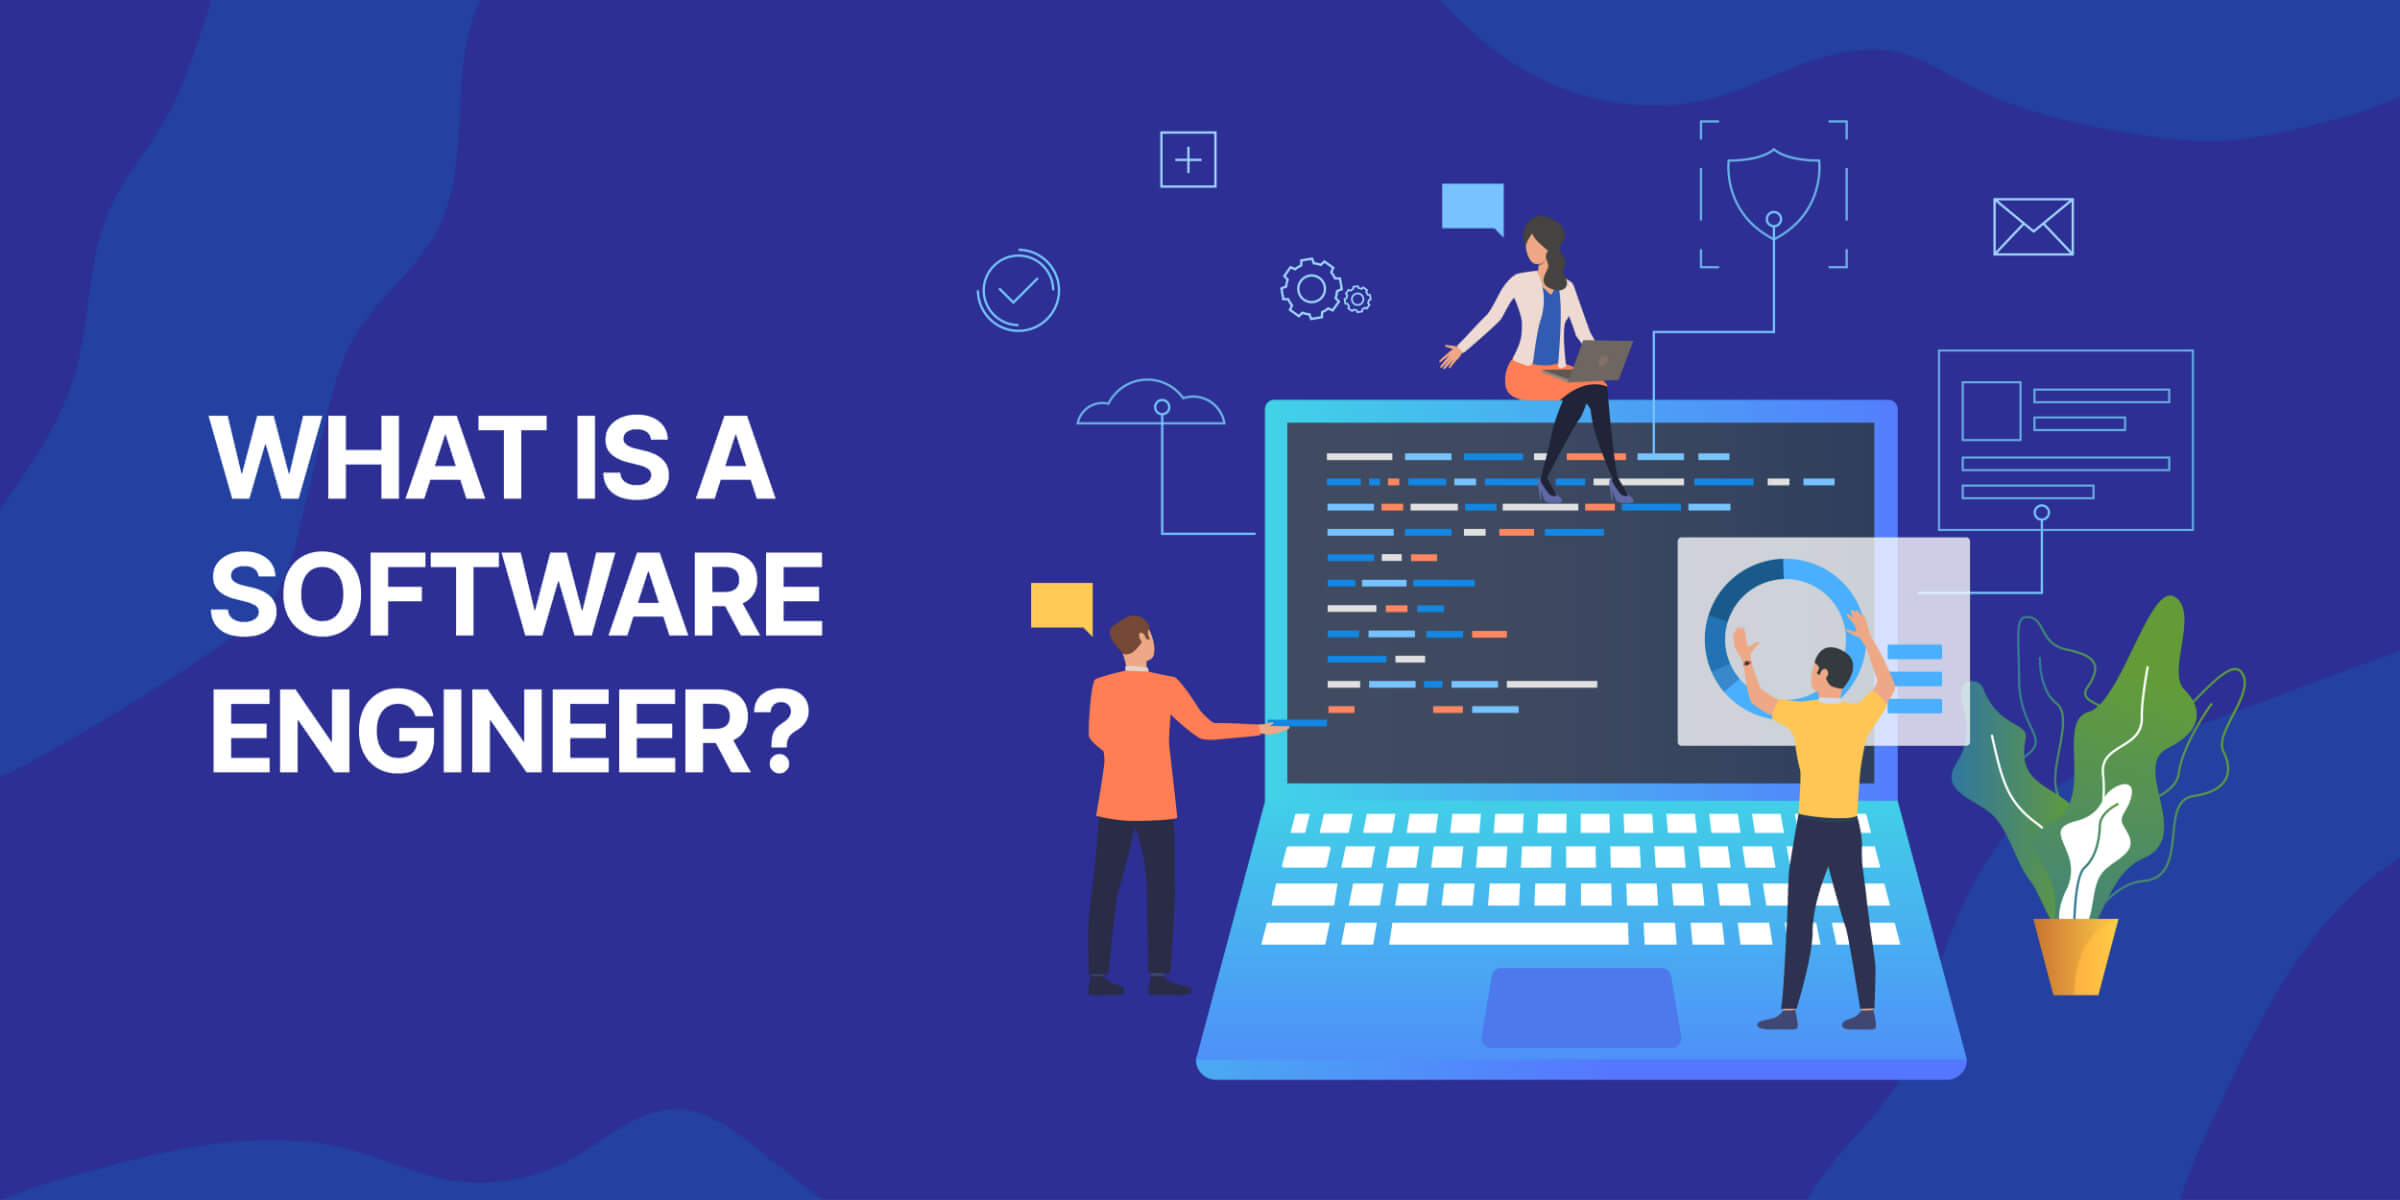 What Is a Software Engineer